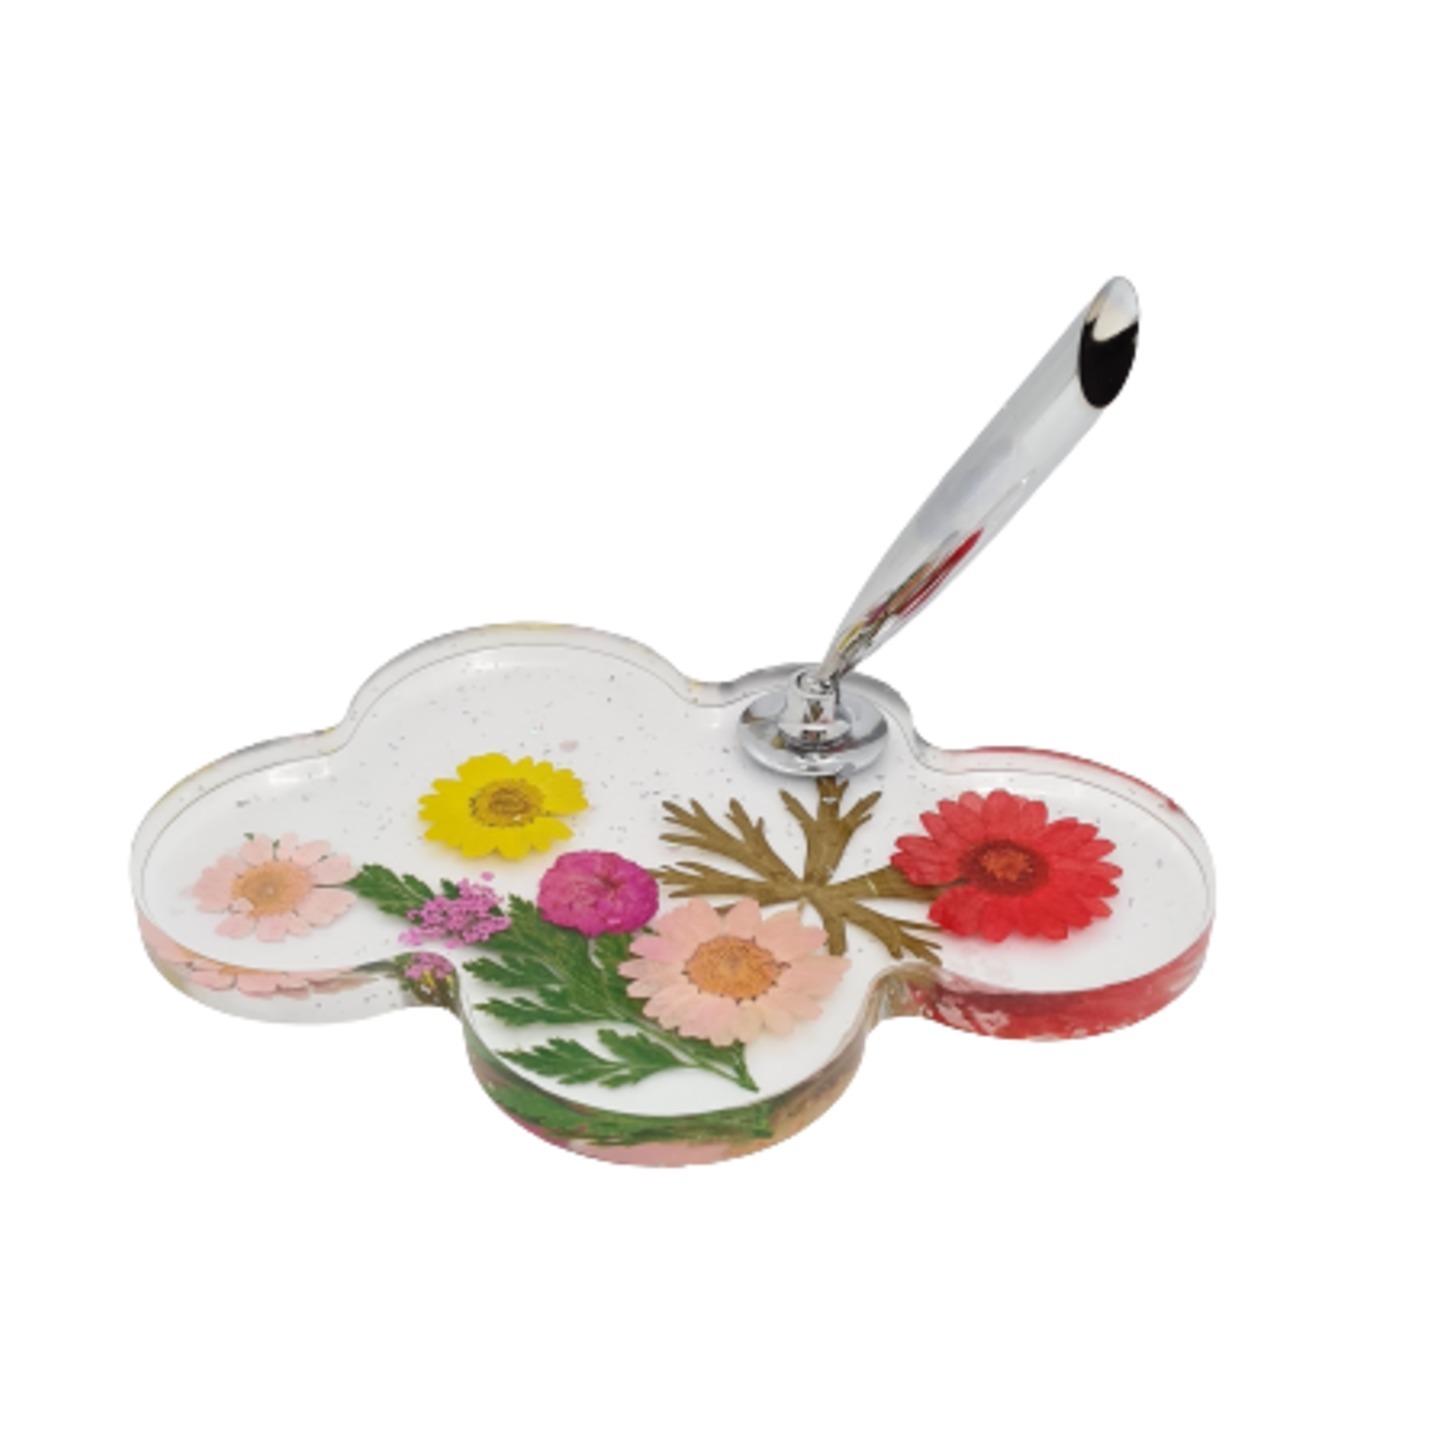 Bloomy Cloud Tray with Pen & Pen Holder  Real flowers & leaves in resin  Handmade